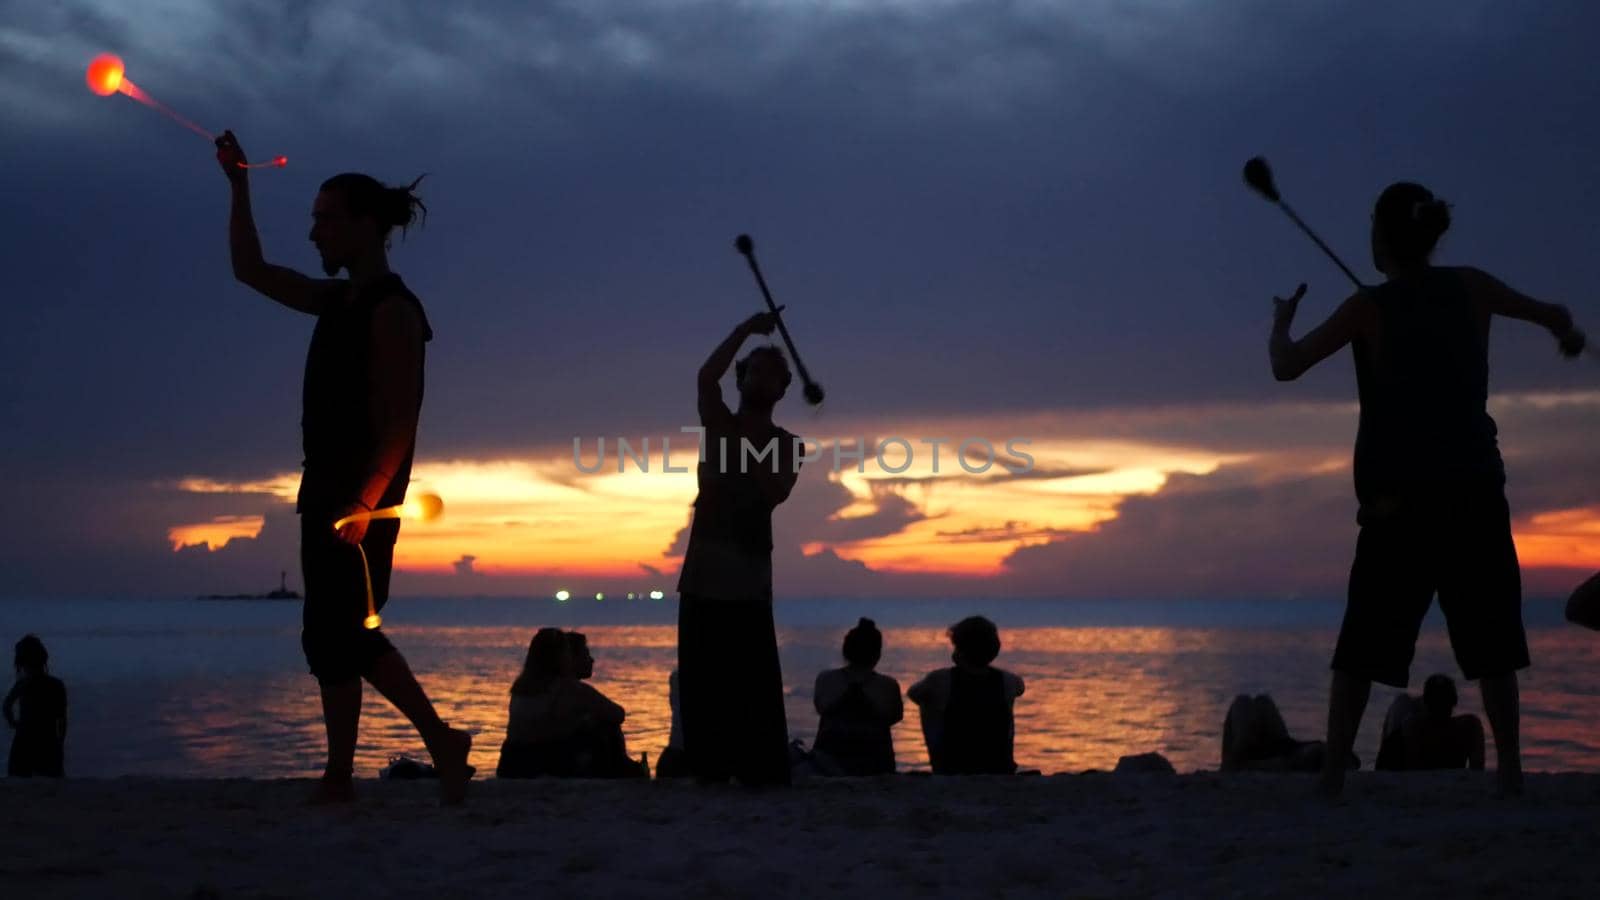 PHANGAN, THAILAND - 23 MARCH 2019 Zen Beach. Silhouettes of performers on beach during sunset. Silhouettes of young anonymous entertainers rehearsing on sandy beach against calm sea and sundown sky. by DogoraSun